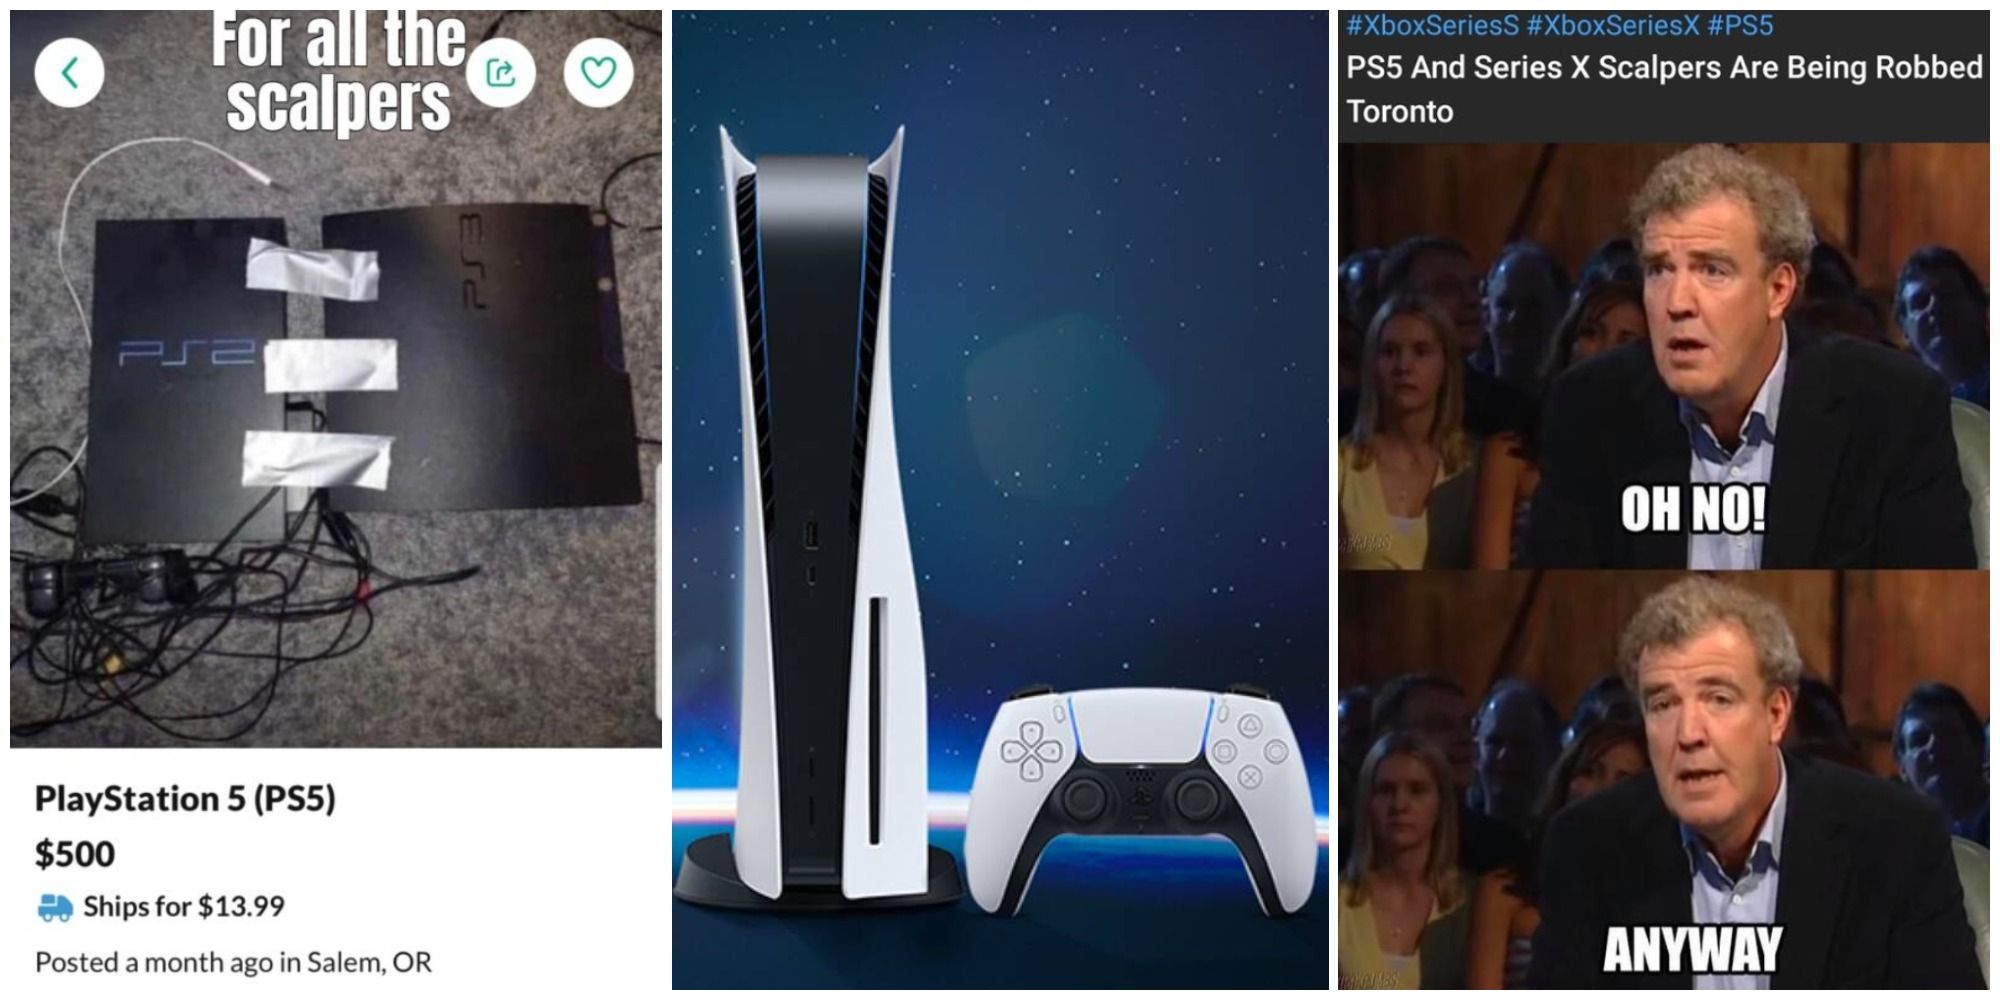 A collage featuring memes regarding the current situation with PS5 scalpers